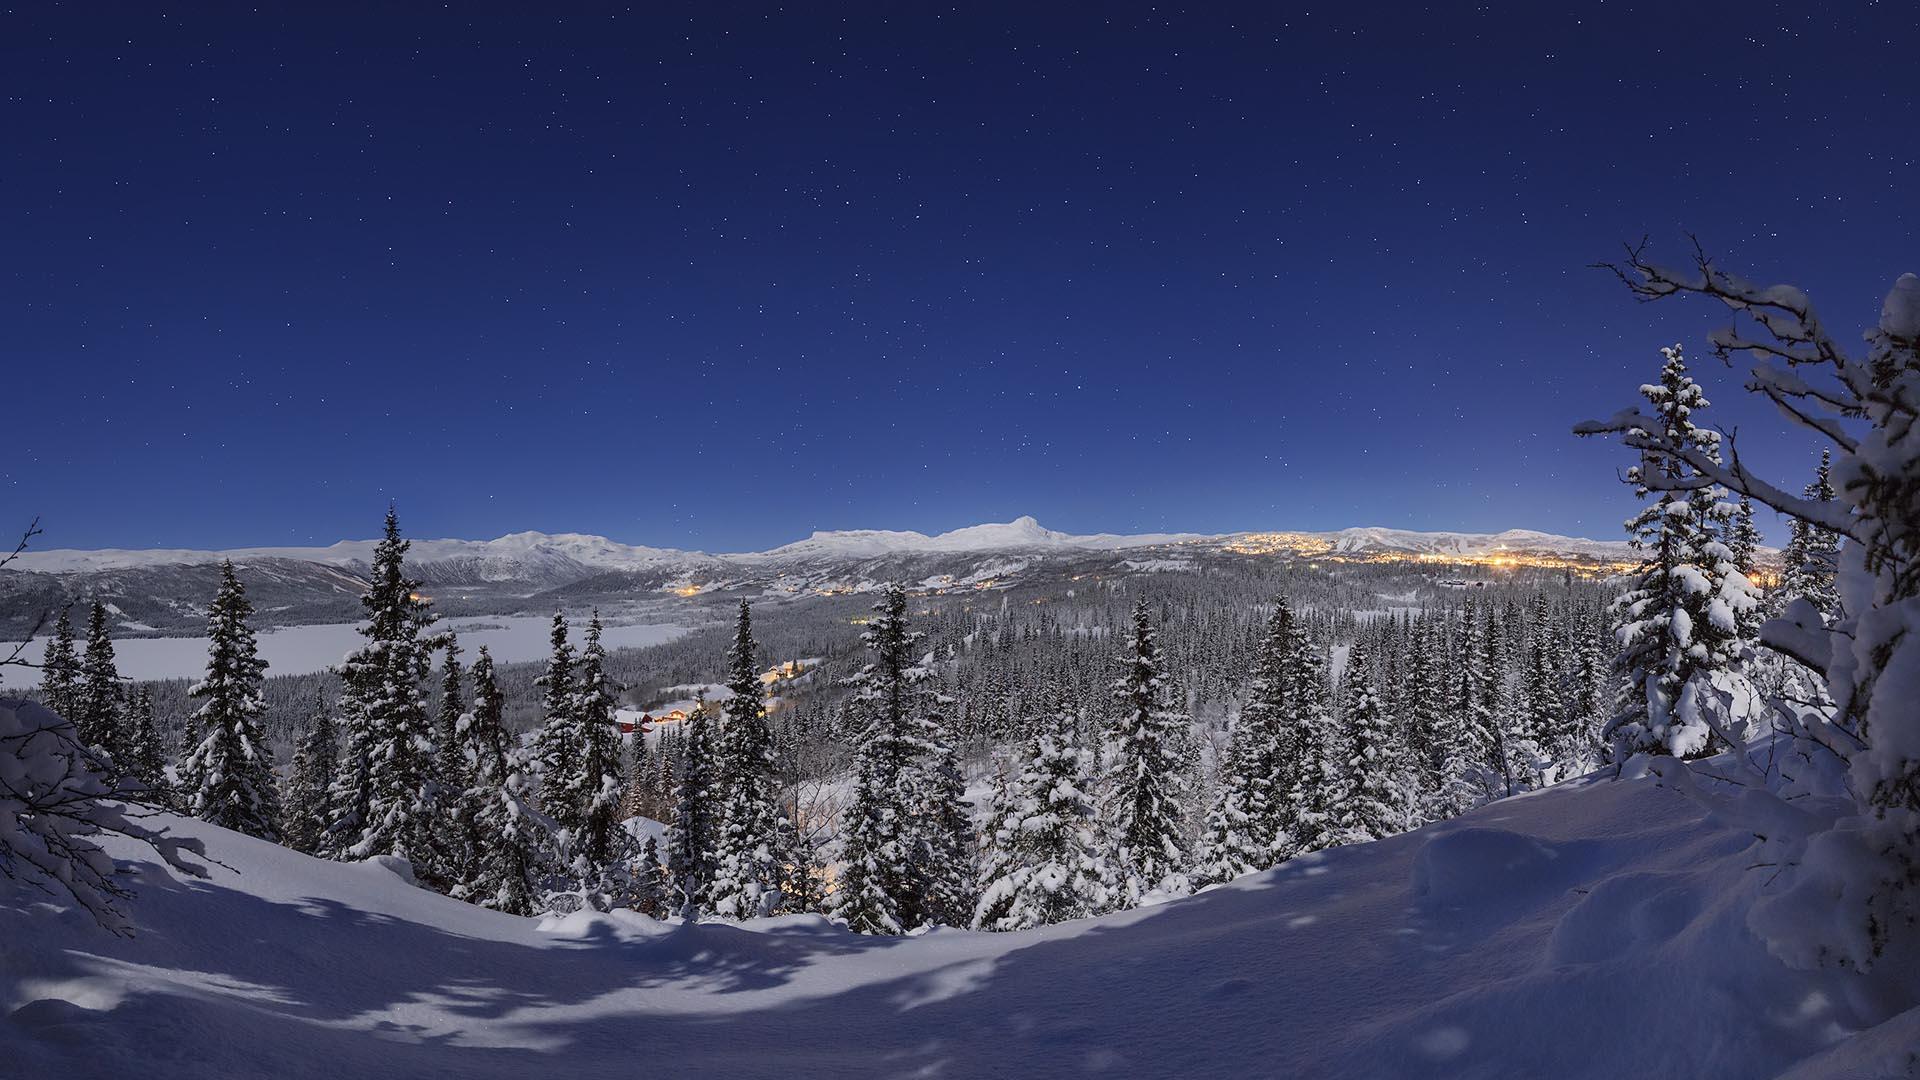 Midwinter wideangle photo by night from a high point over snowy spruce forest to a mountain village that lights up on the horizon together with snow-covered mountains